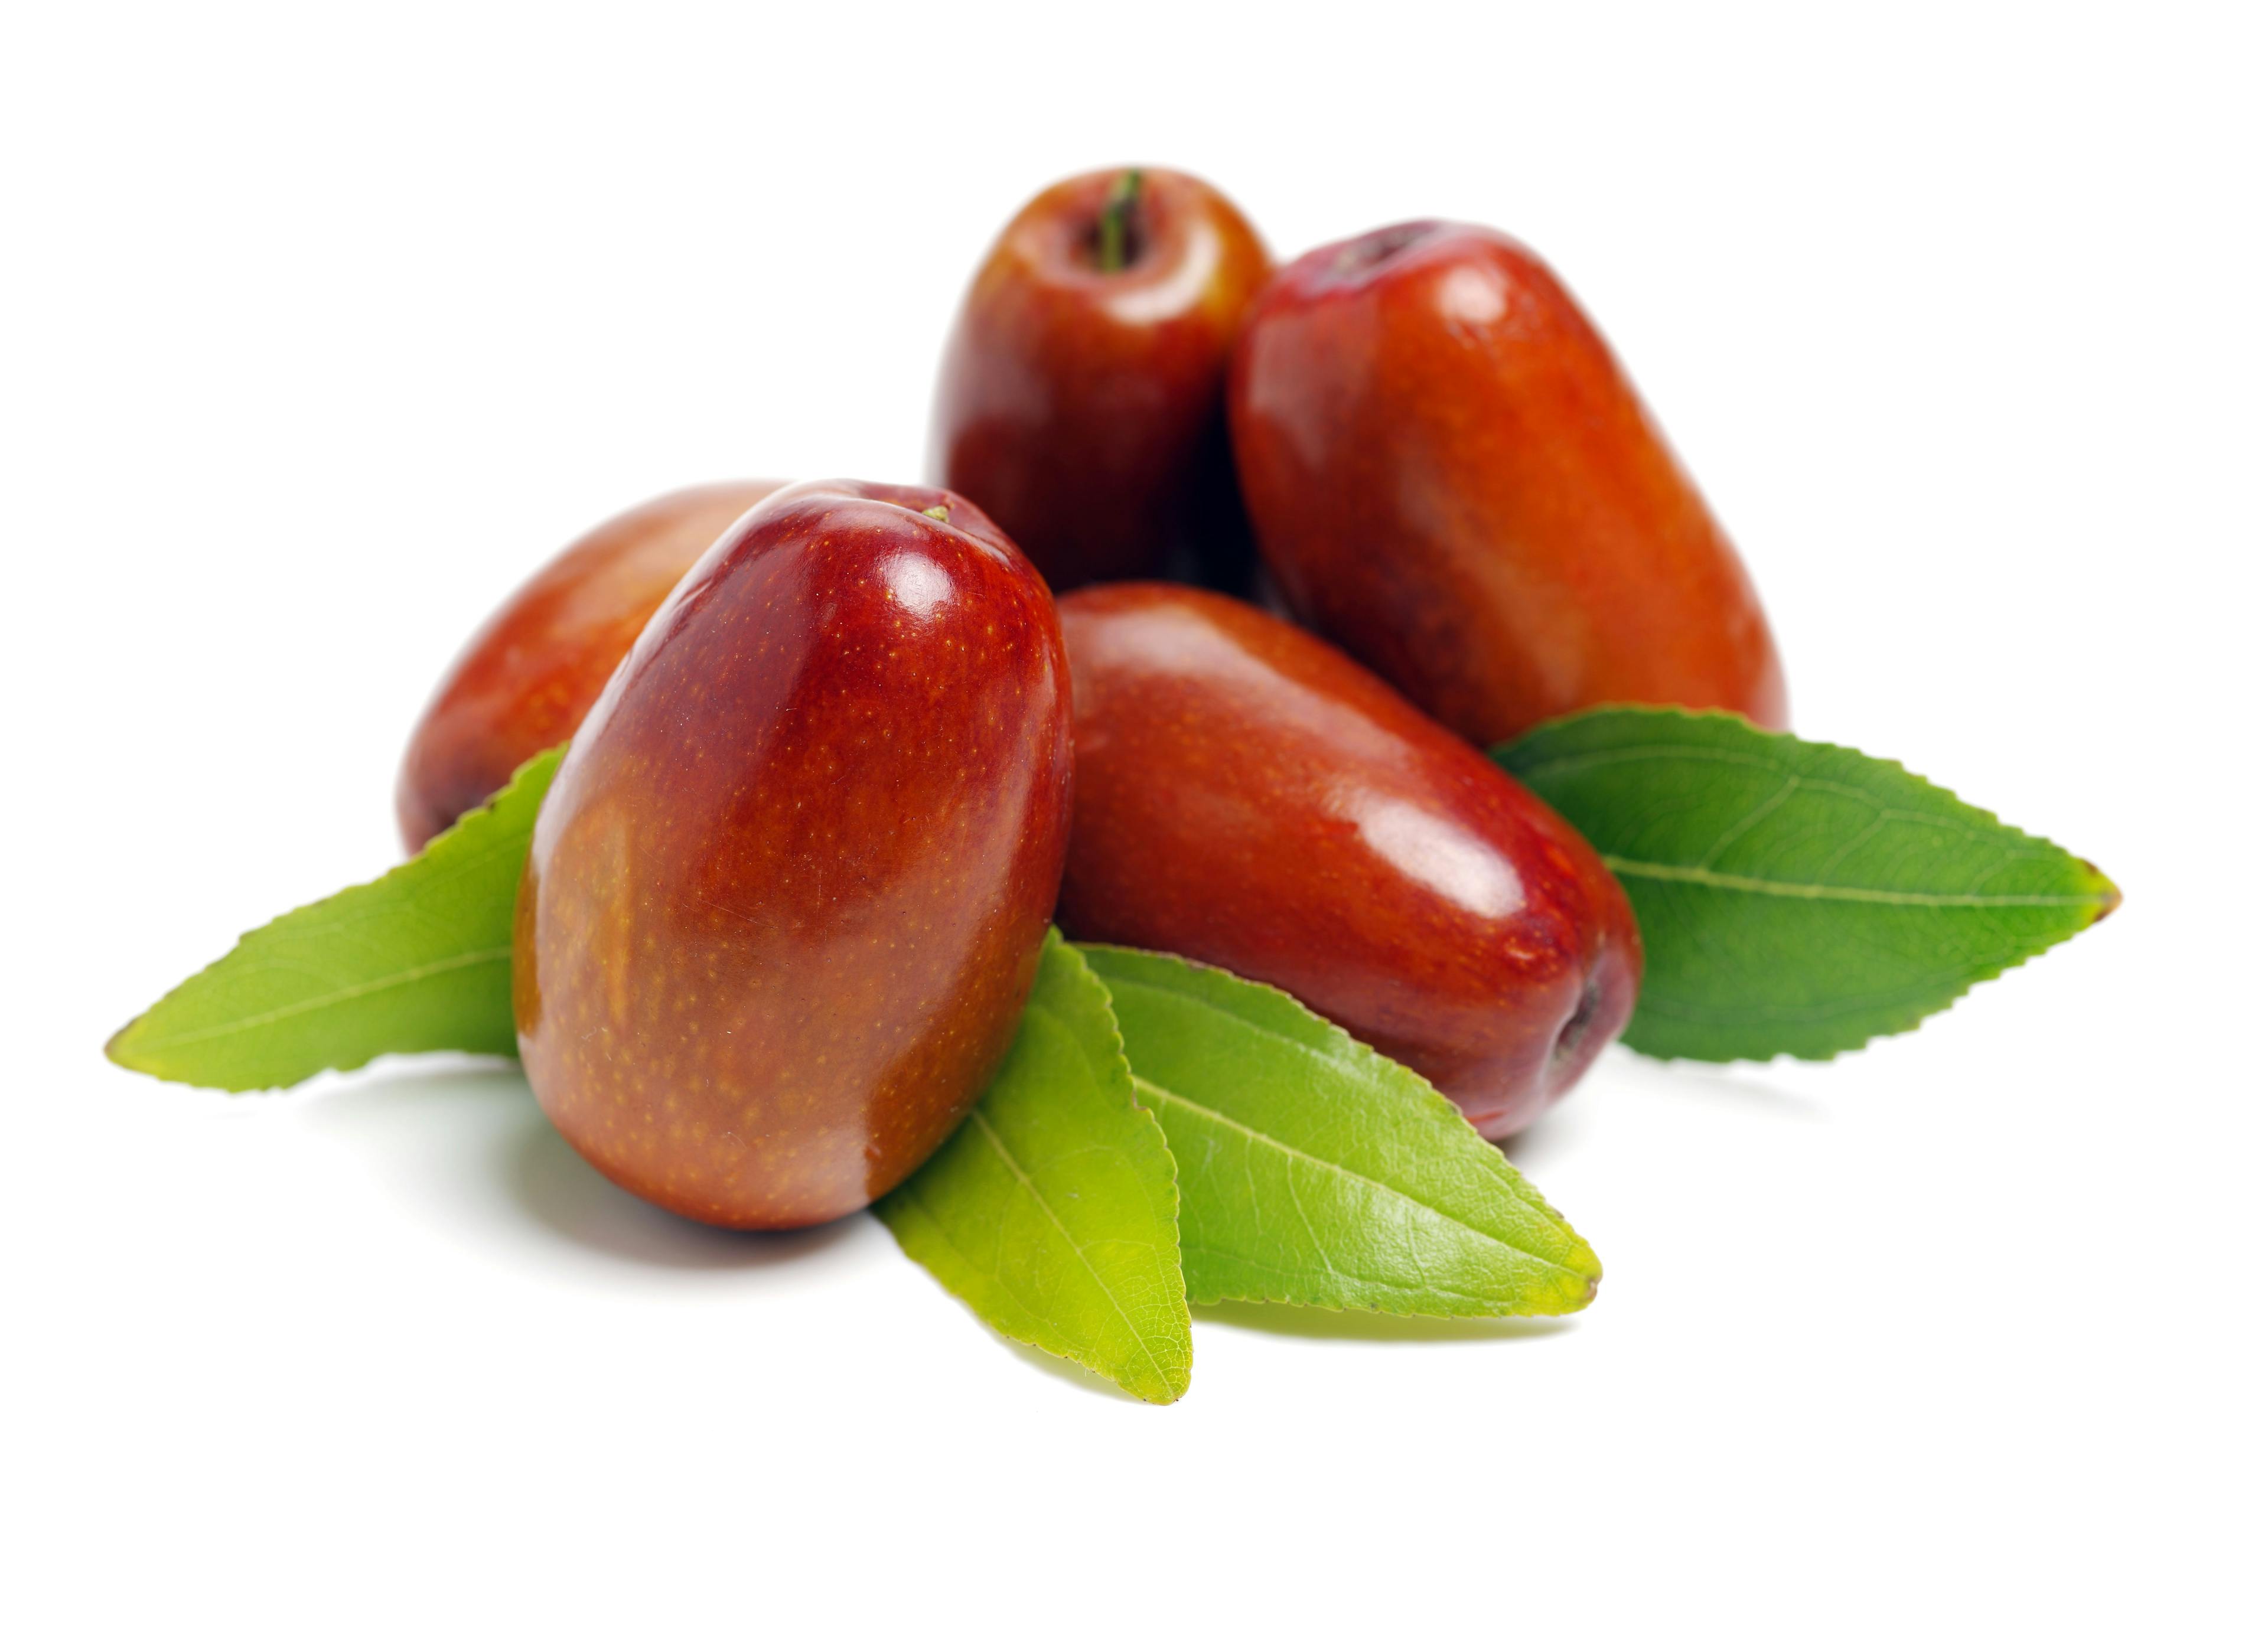 jujube or chinese date on white background | Image Credit: © zcy - stock.adobe.com